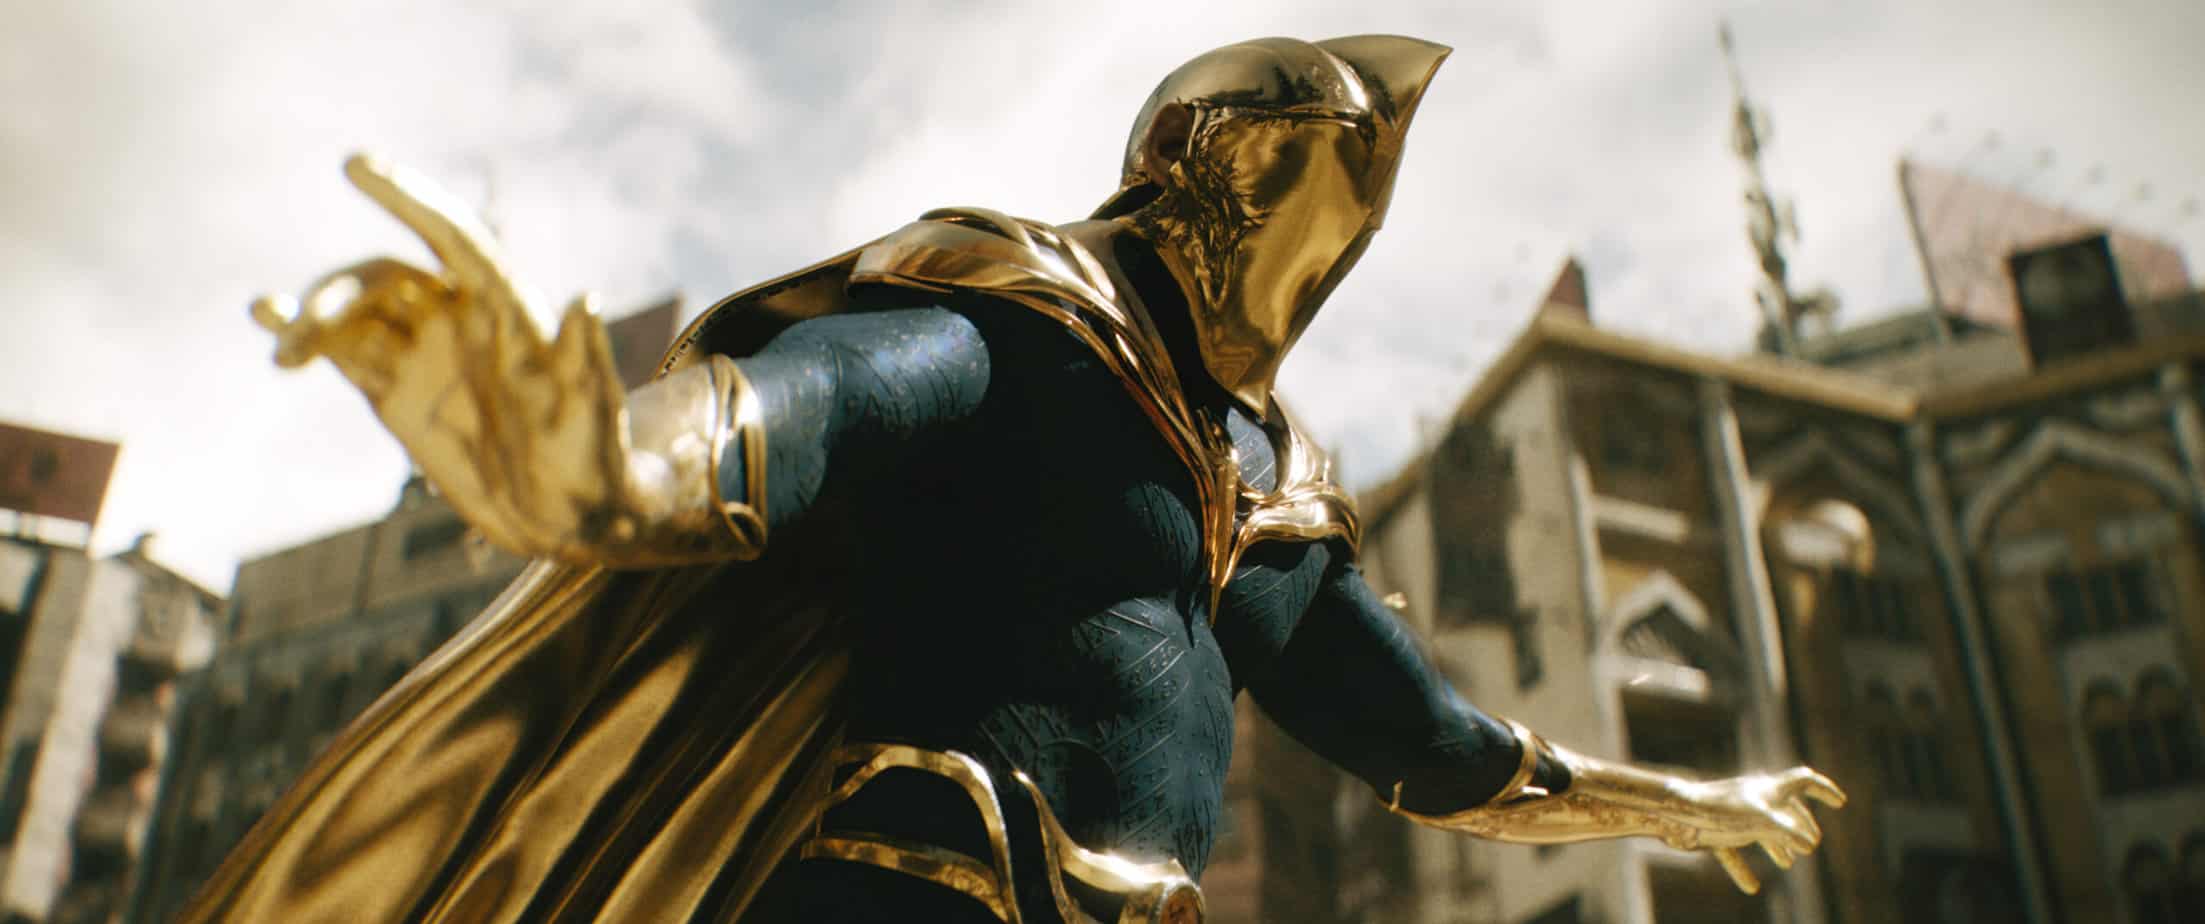 dr fate: movie quotes from black adam 2022